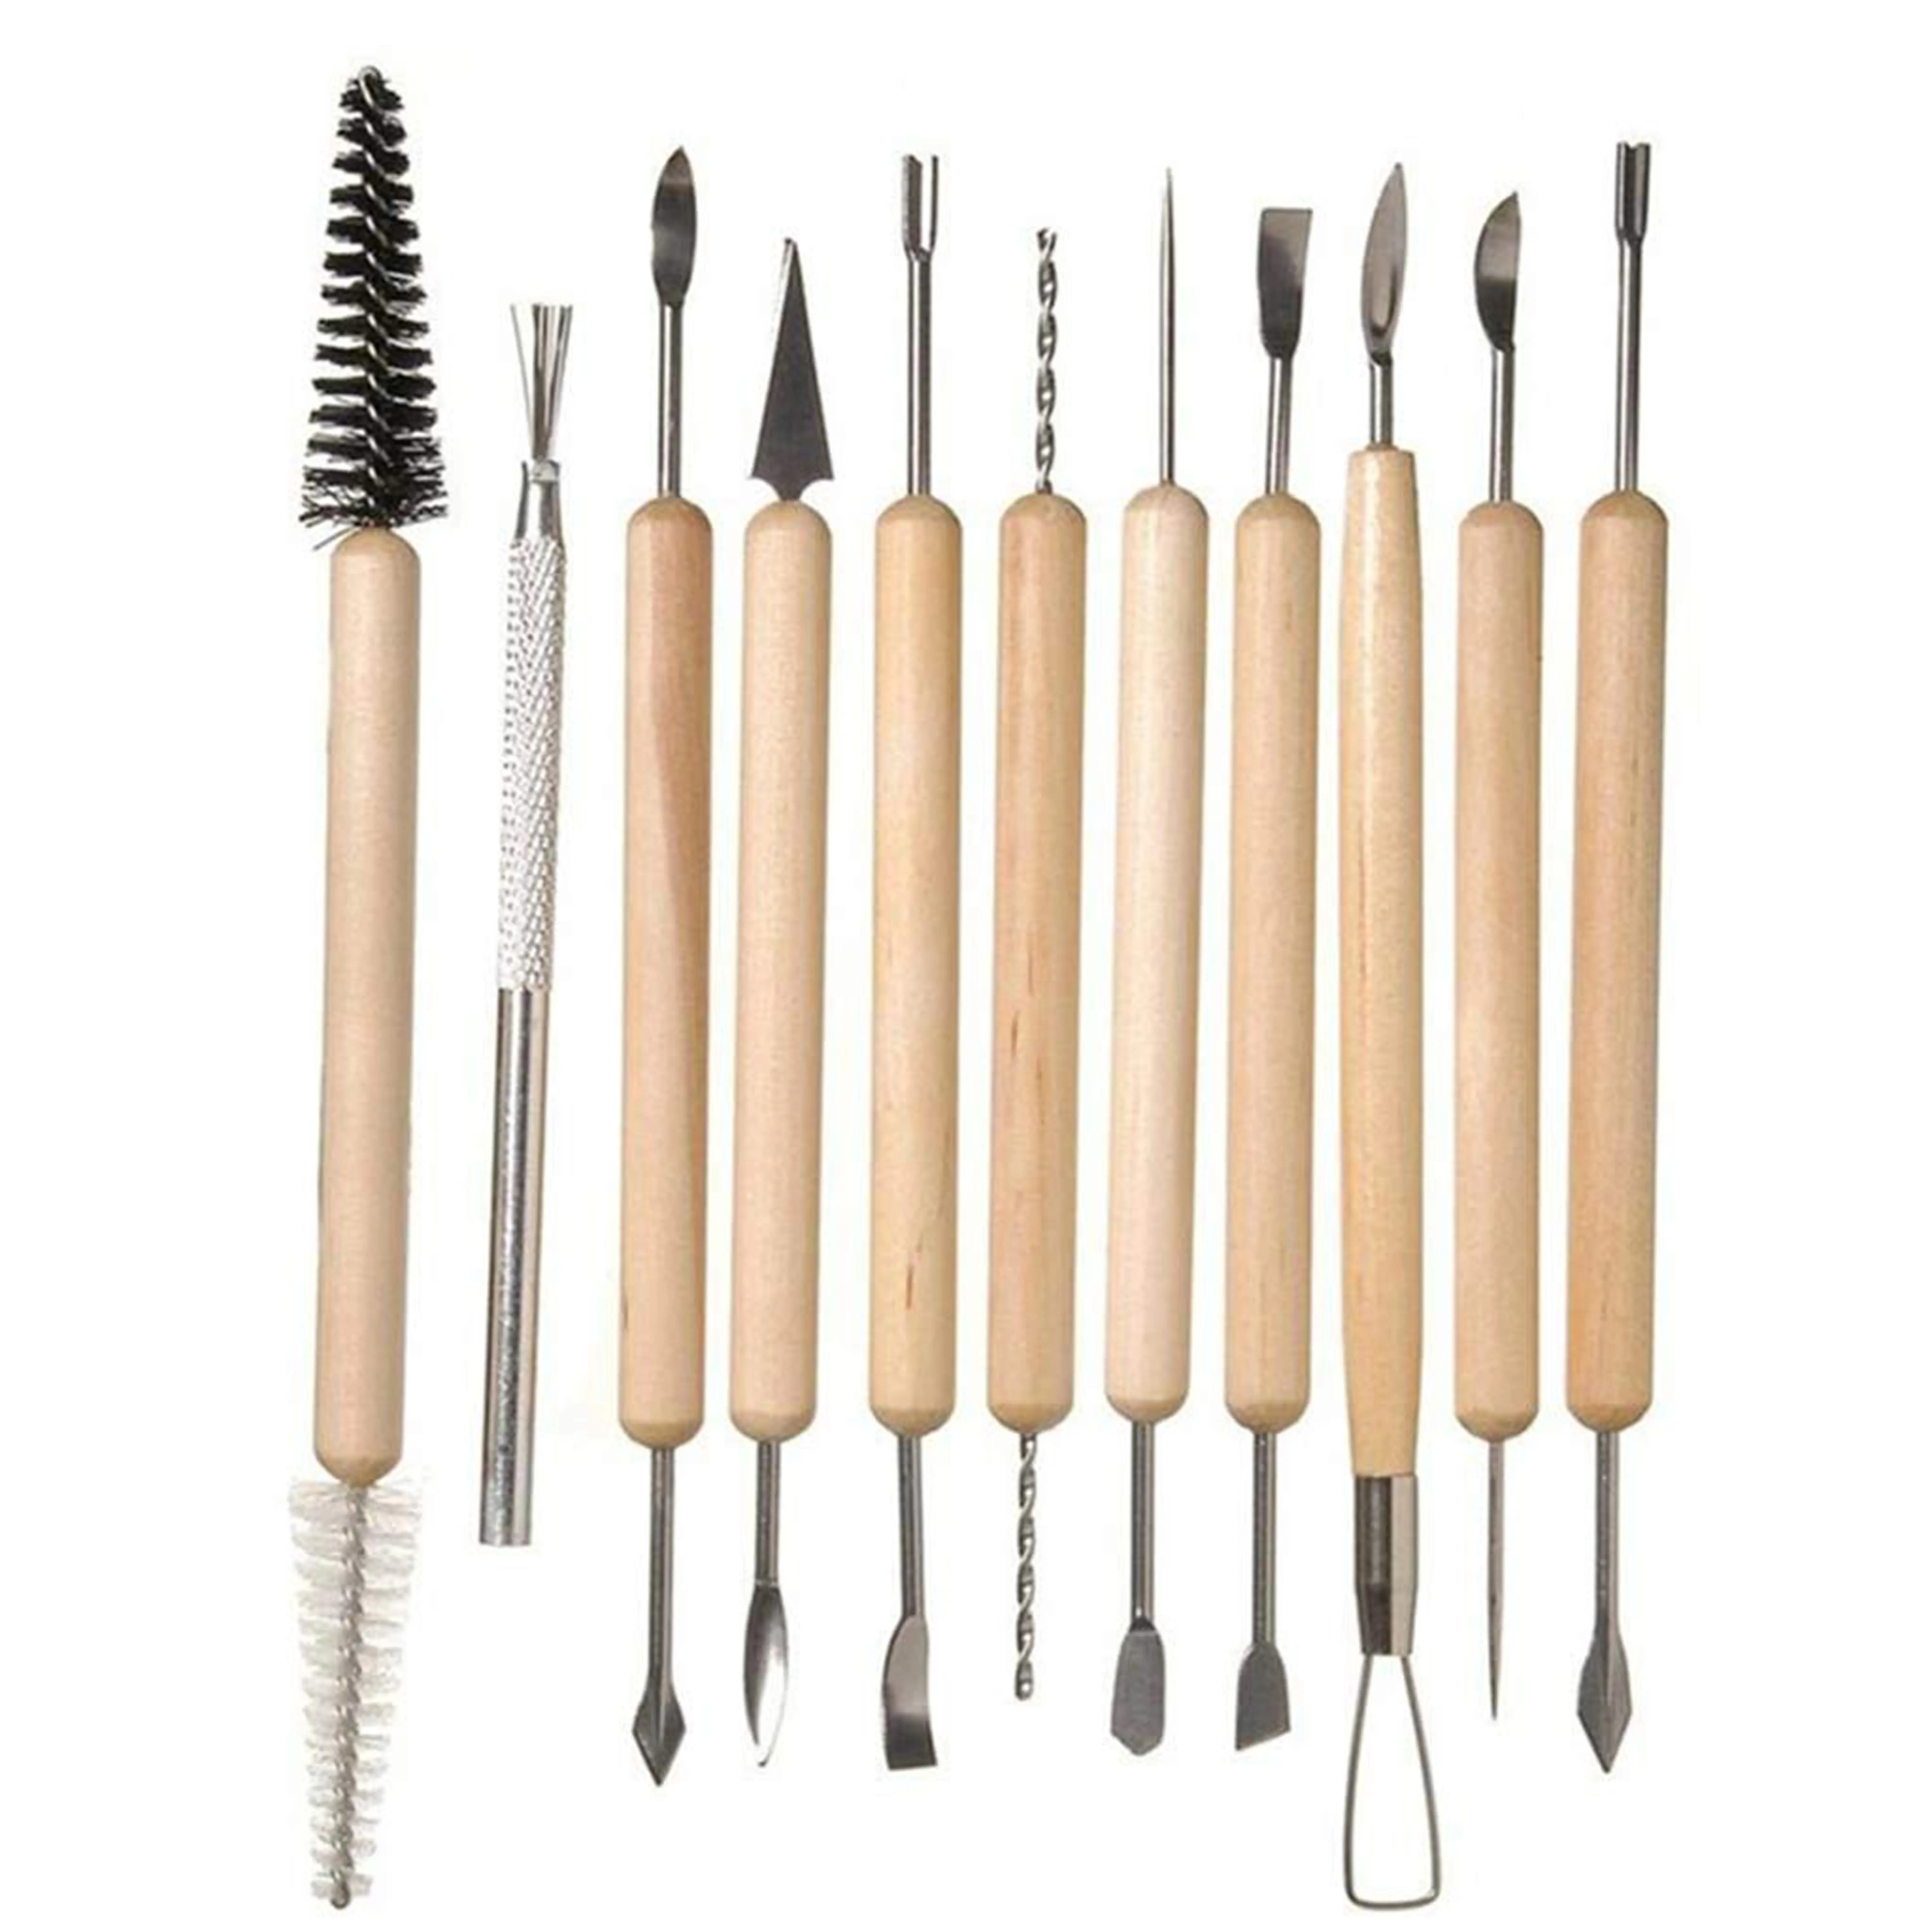 11pcs Clay Sculpting Kit Sculpt Smoothing Wax Carving Pottery Ceramic Tools Polymer Shapers Modeling Tool For Art Supplies